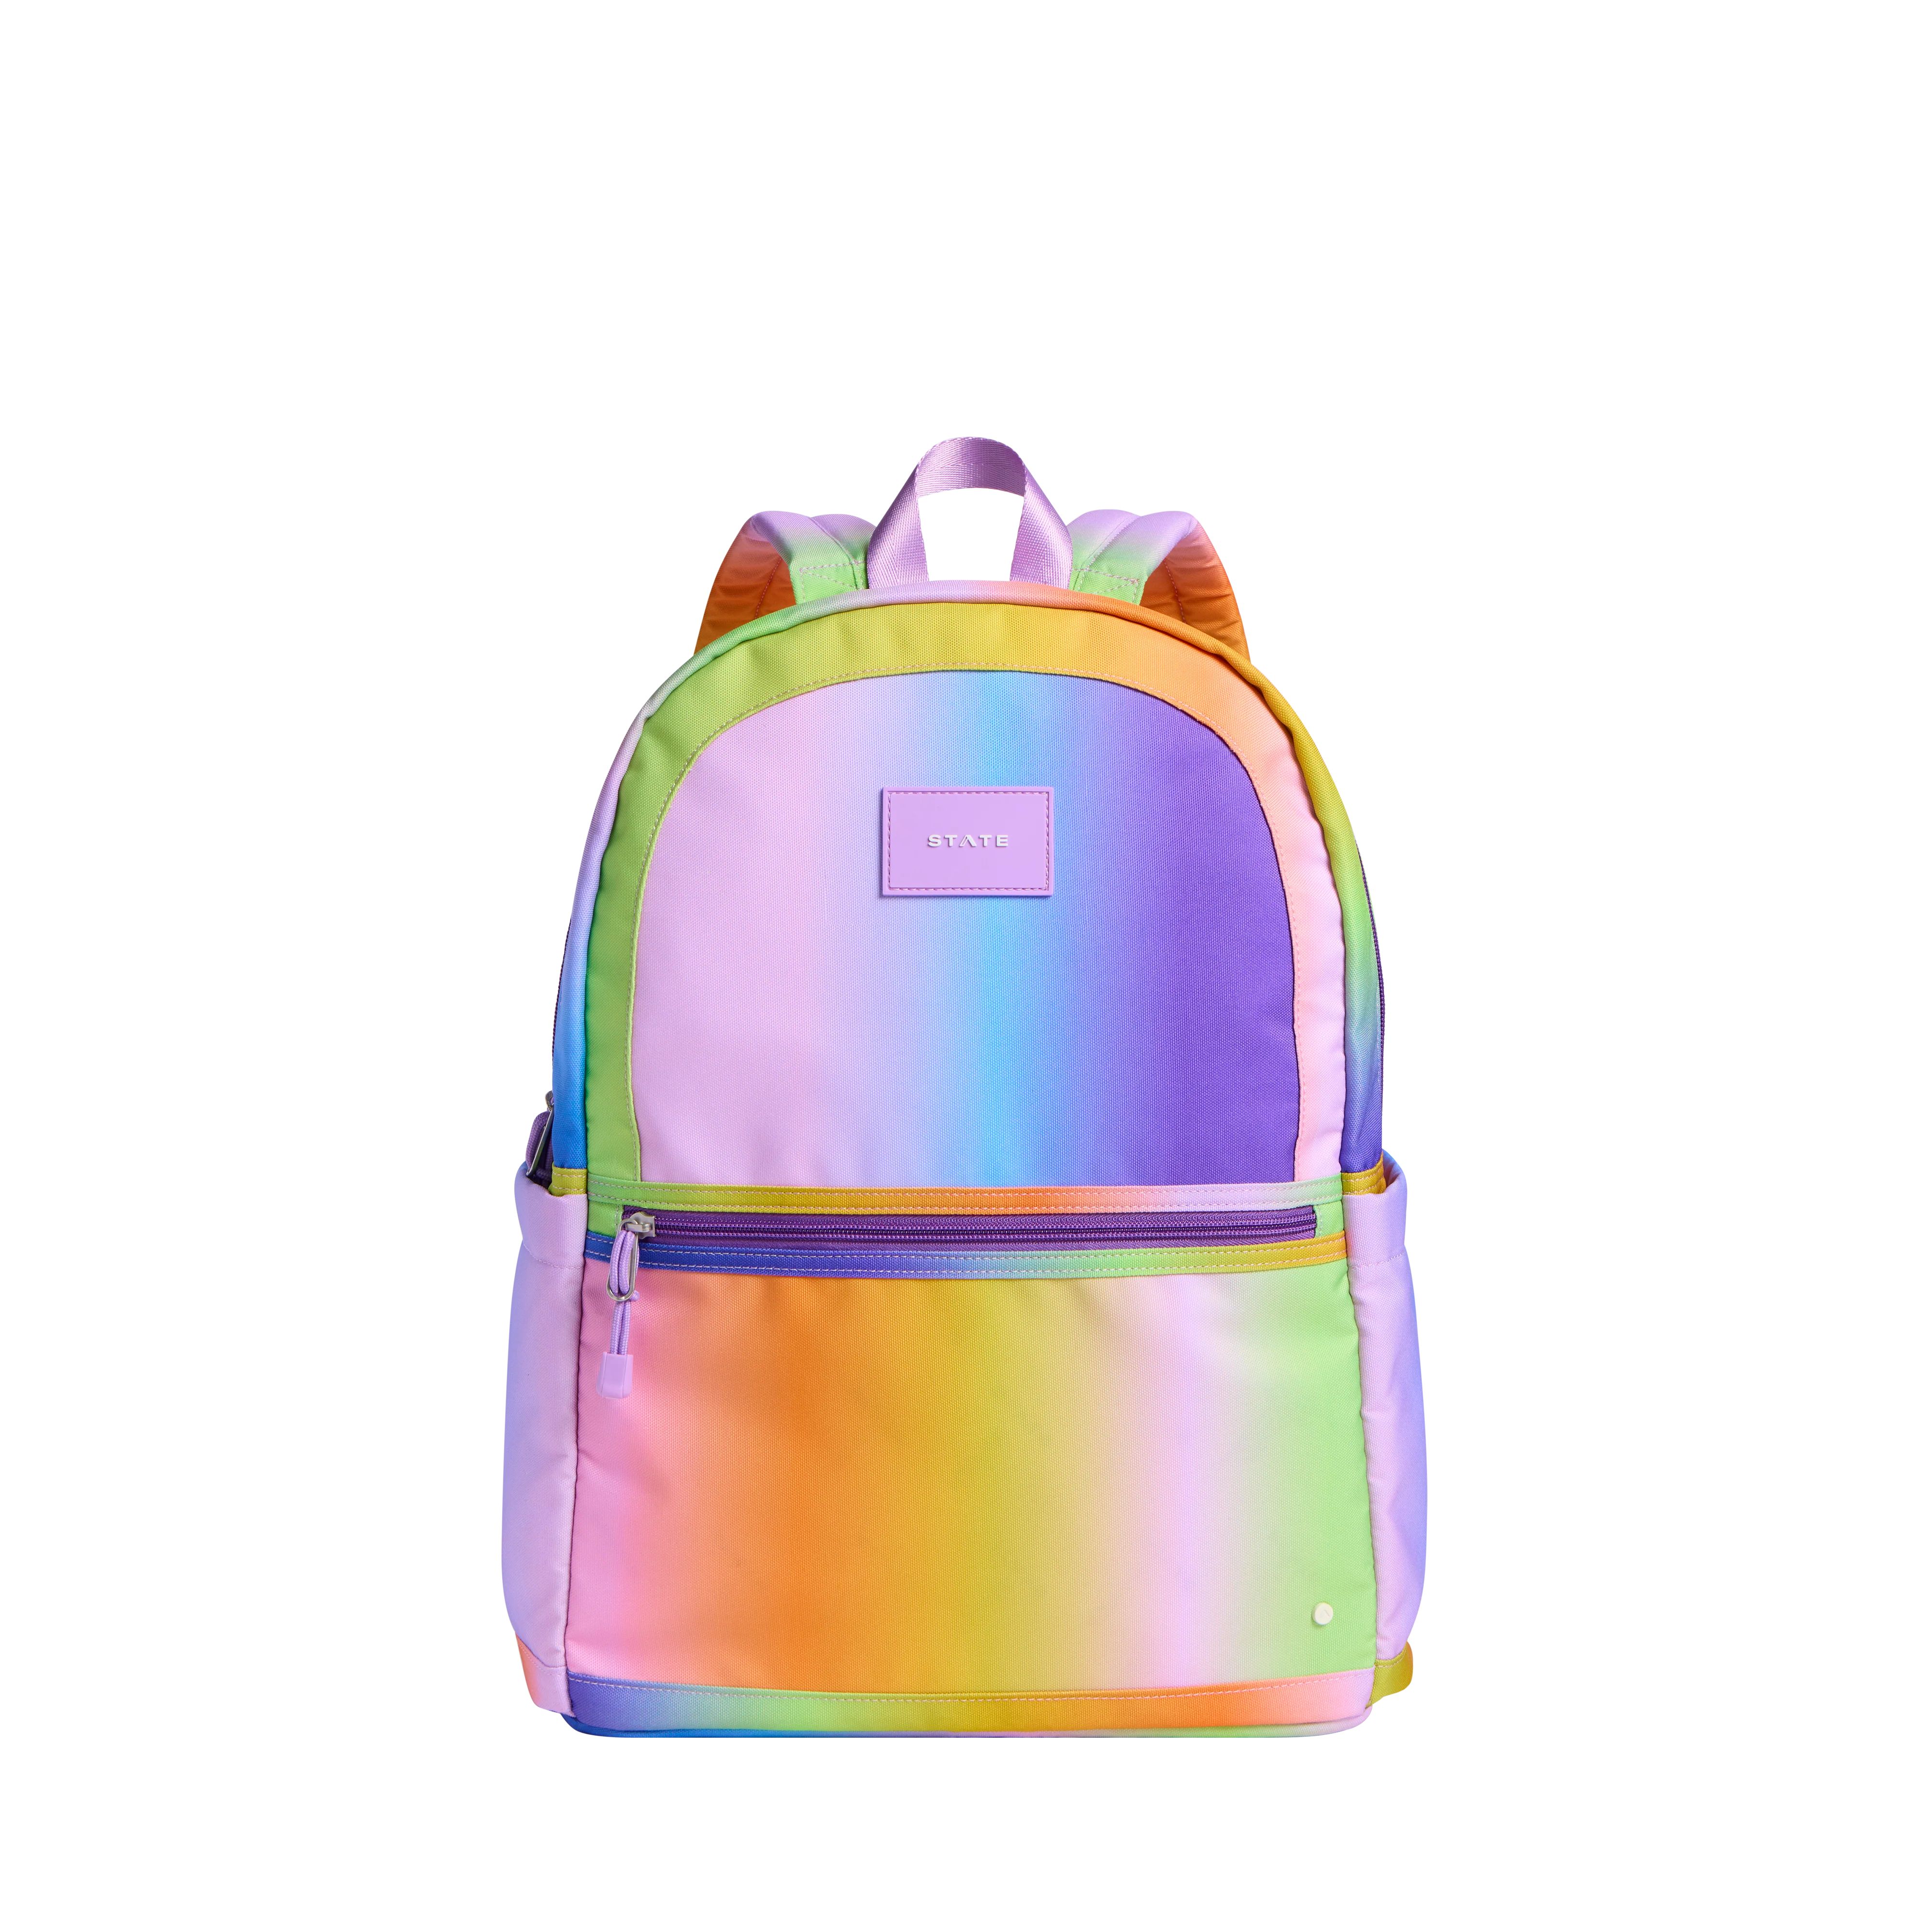 STATE Bags | Kane Kids Large Backpack Recycled Polyester Rainbow Gradient | STATE Bags